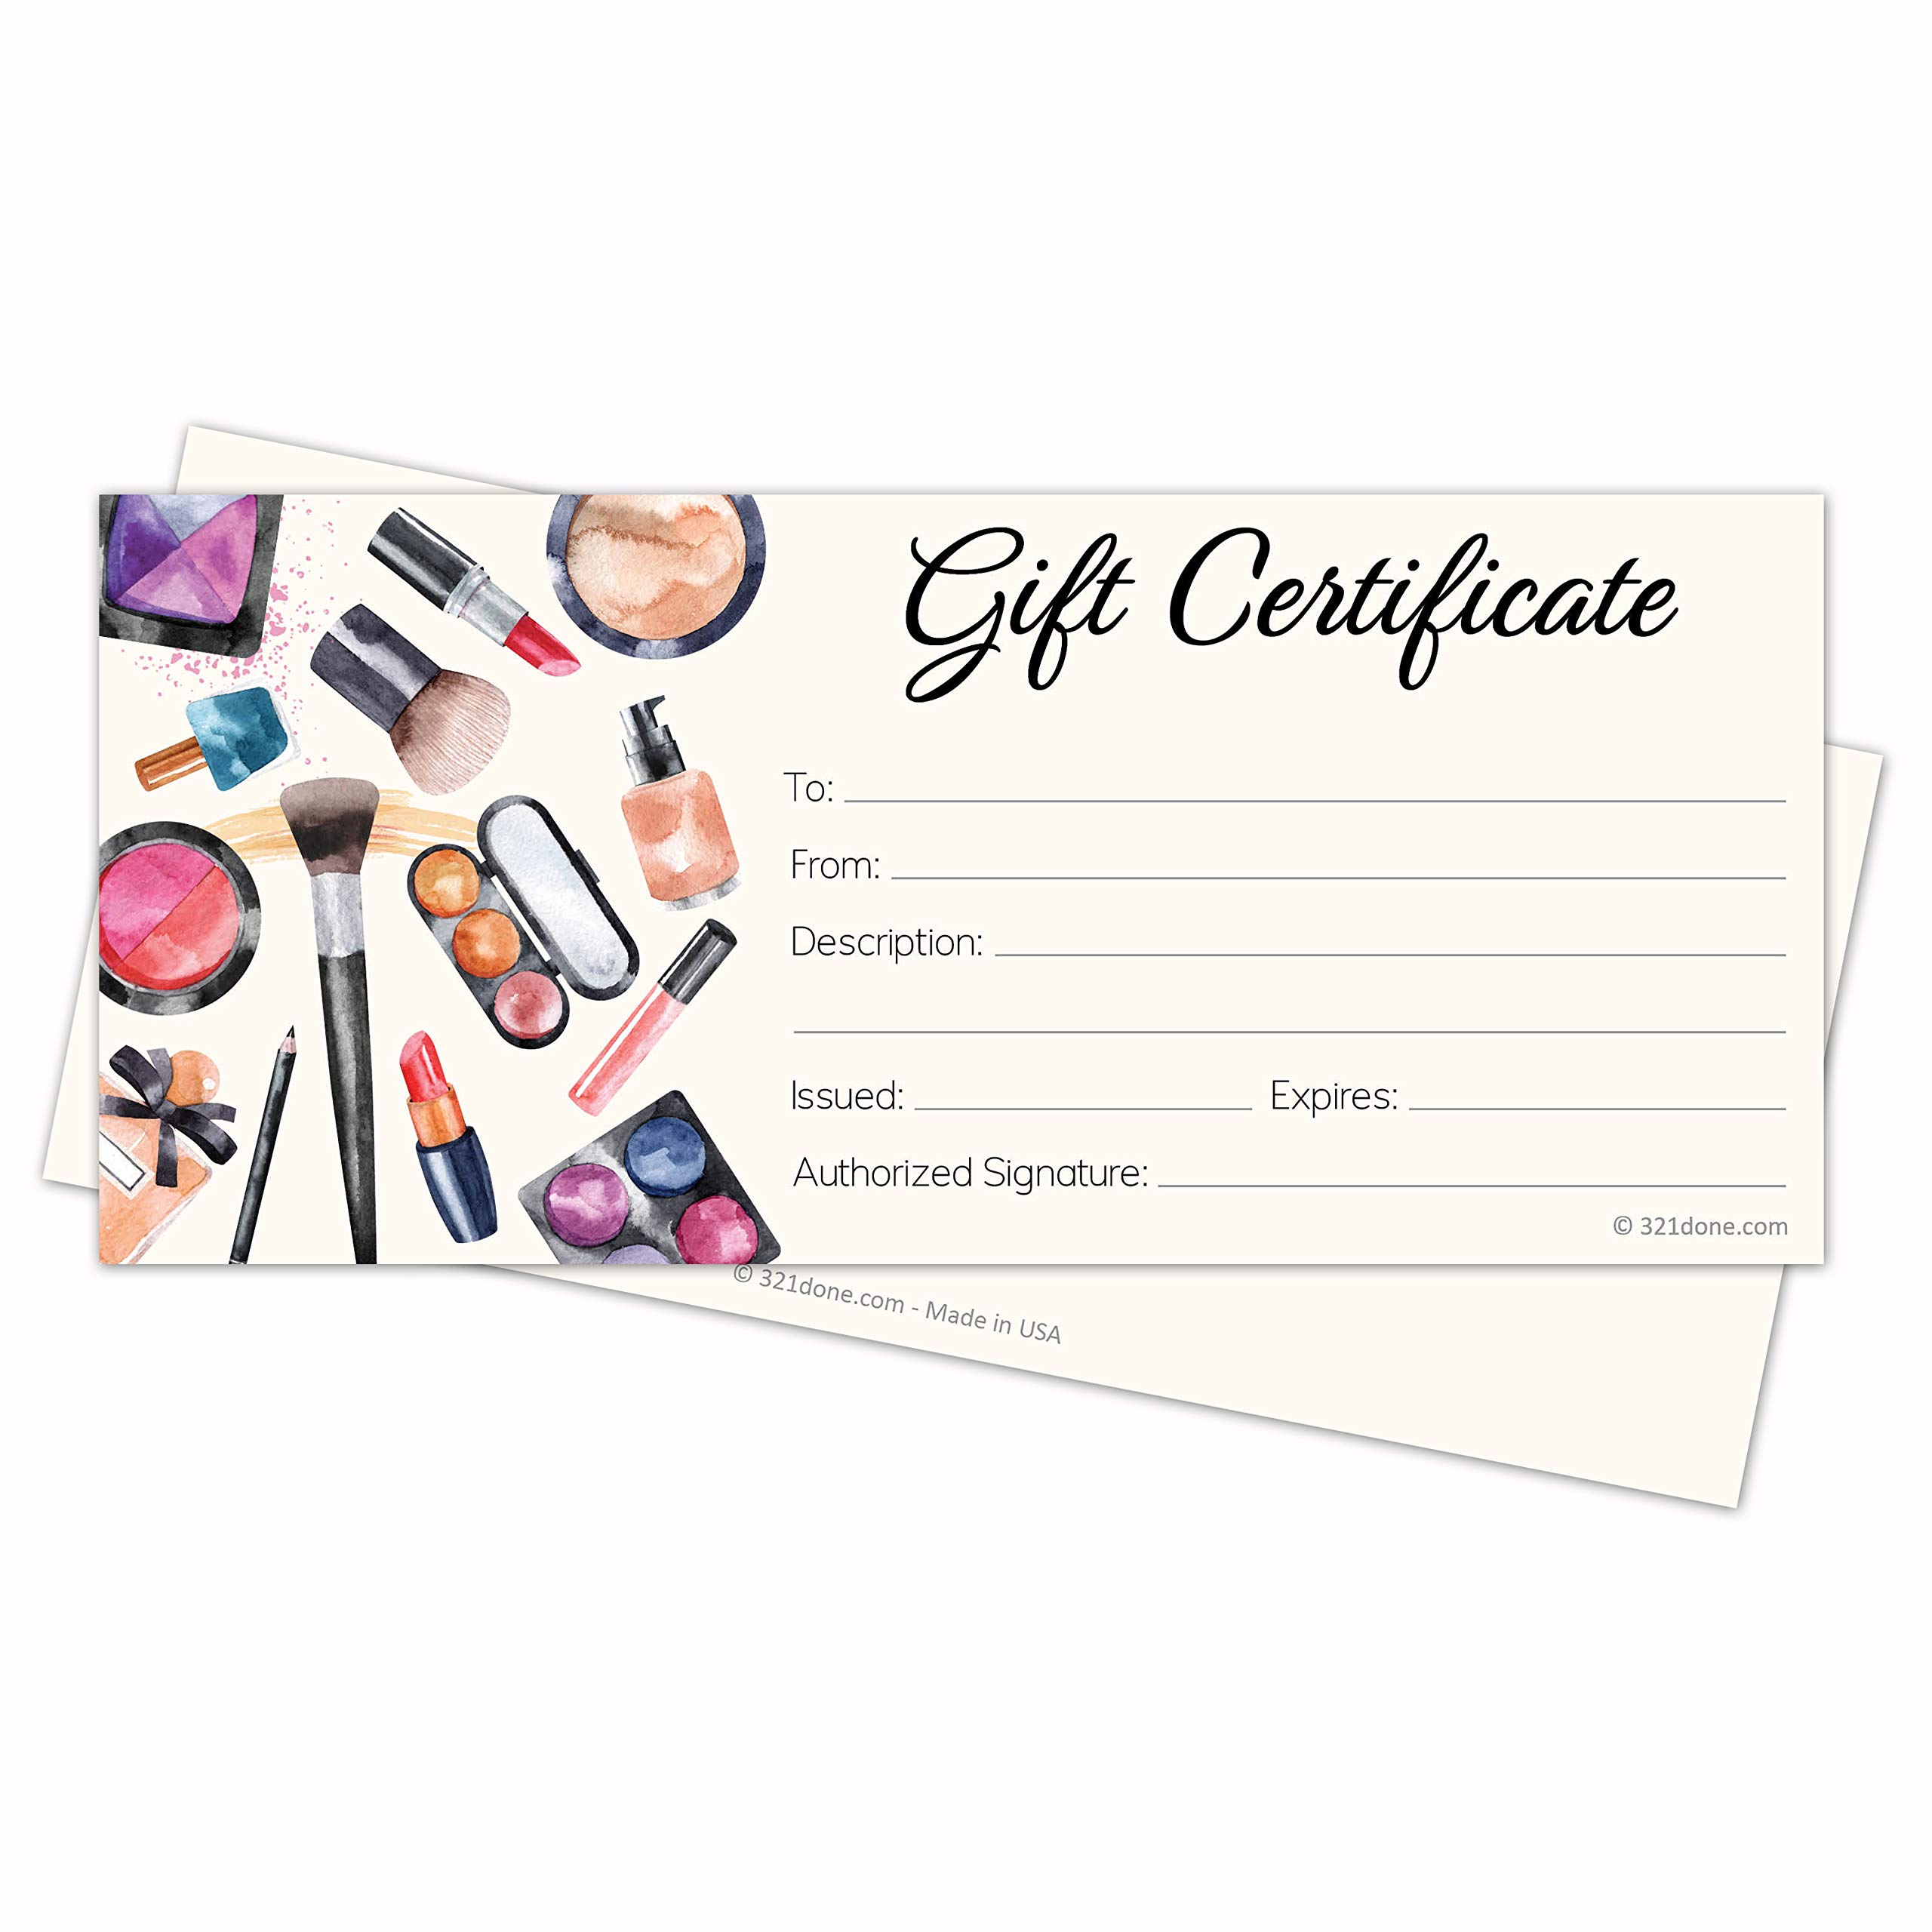 10Done Beauty Gift Certificates (Set of 10 with Envelopes) 10x10 Inches  Blank for Makeup Small Business, Voucher, Salon Spa Cosmetics Sales Rep -  Made  With Mary Kay Gift Certificate Template